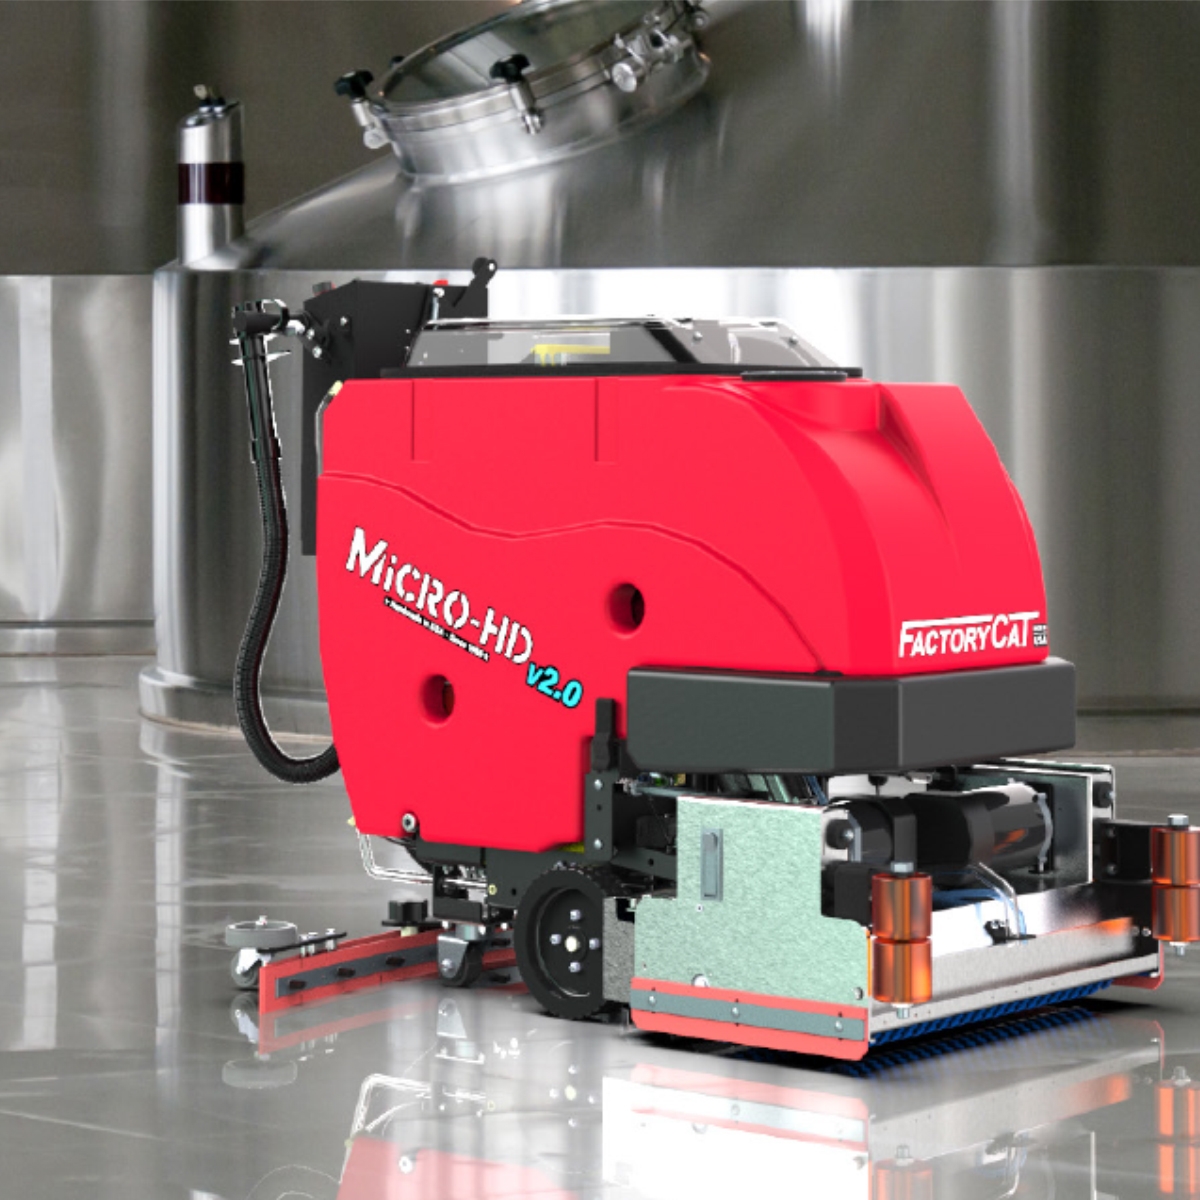 FactoryCat MICRO-HD Floor Scrubber in use in front of large food processing equipment.